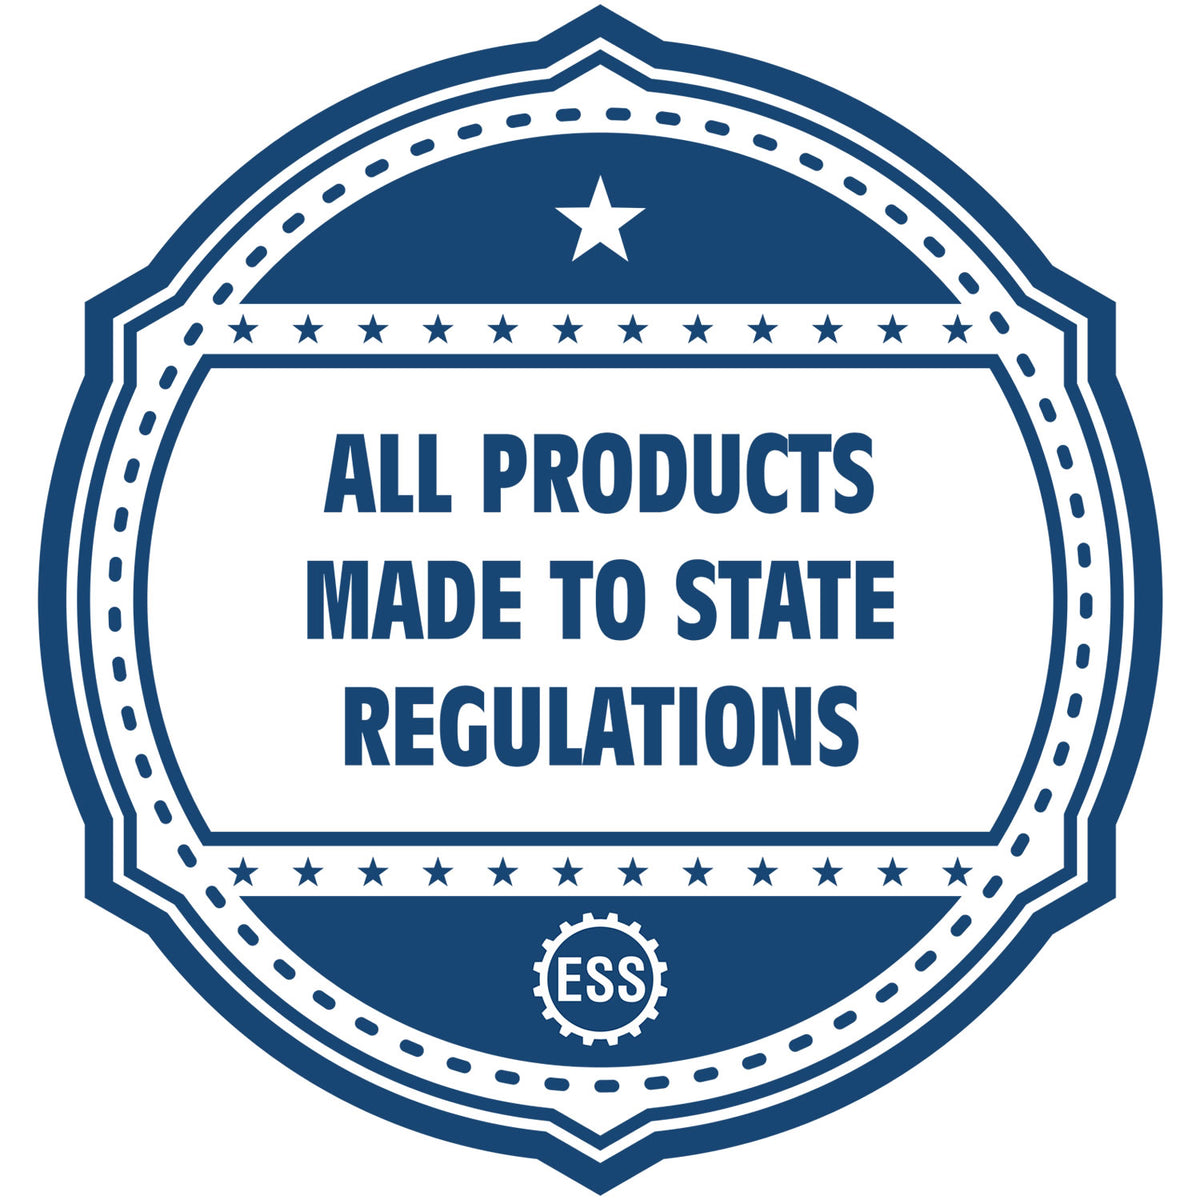 A blue icon or badge for the Soft New Jersey Professional Geologist Seal showing that this product is made in compliance with state regulations.